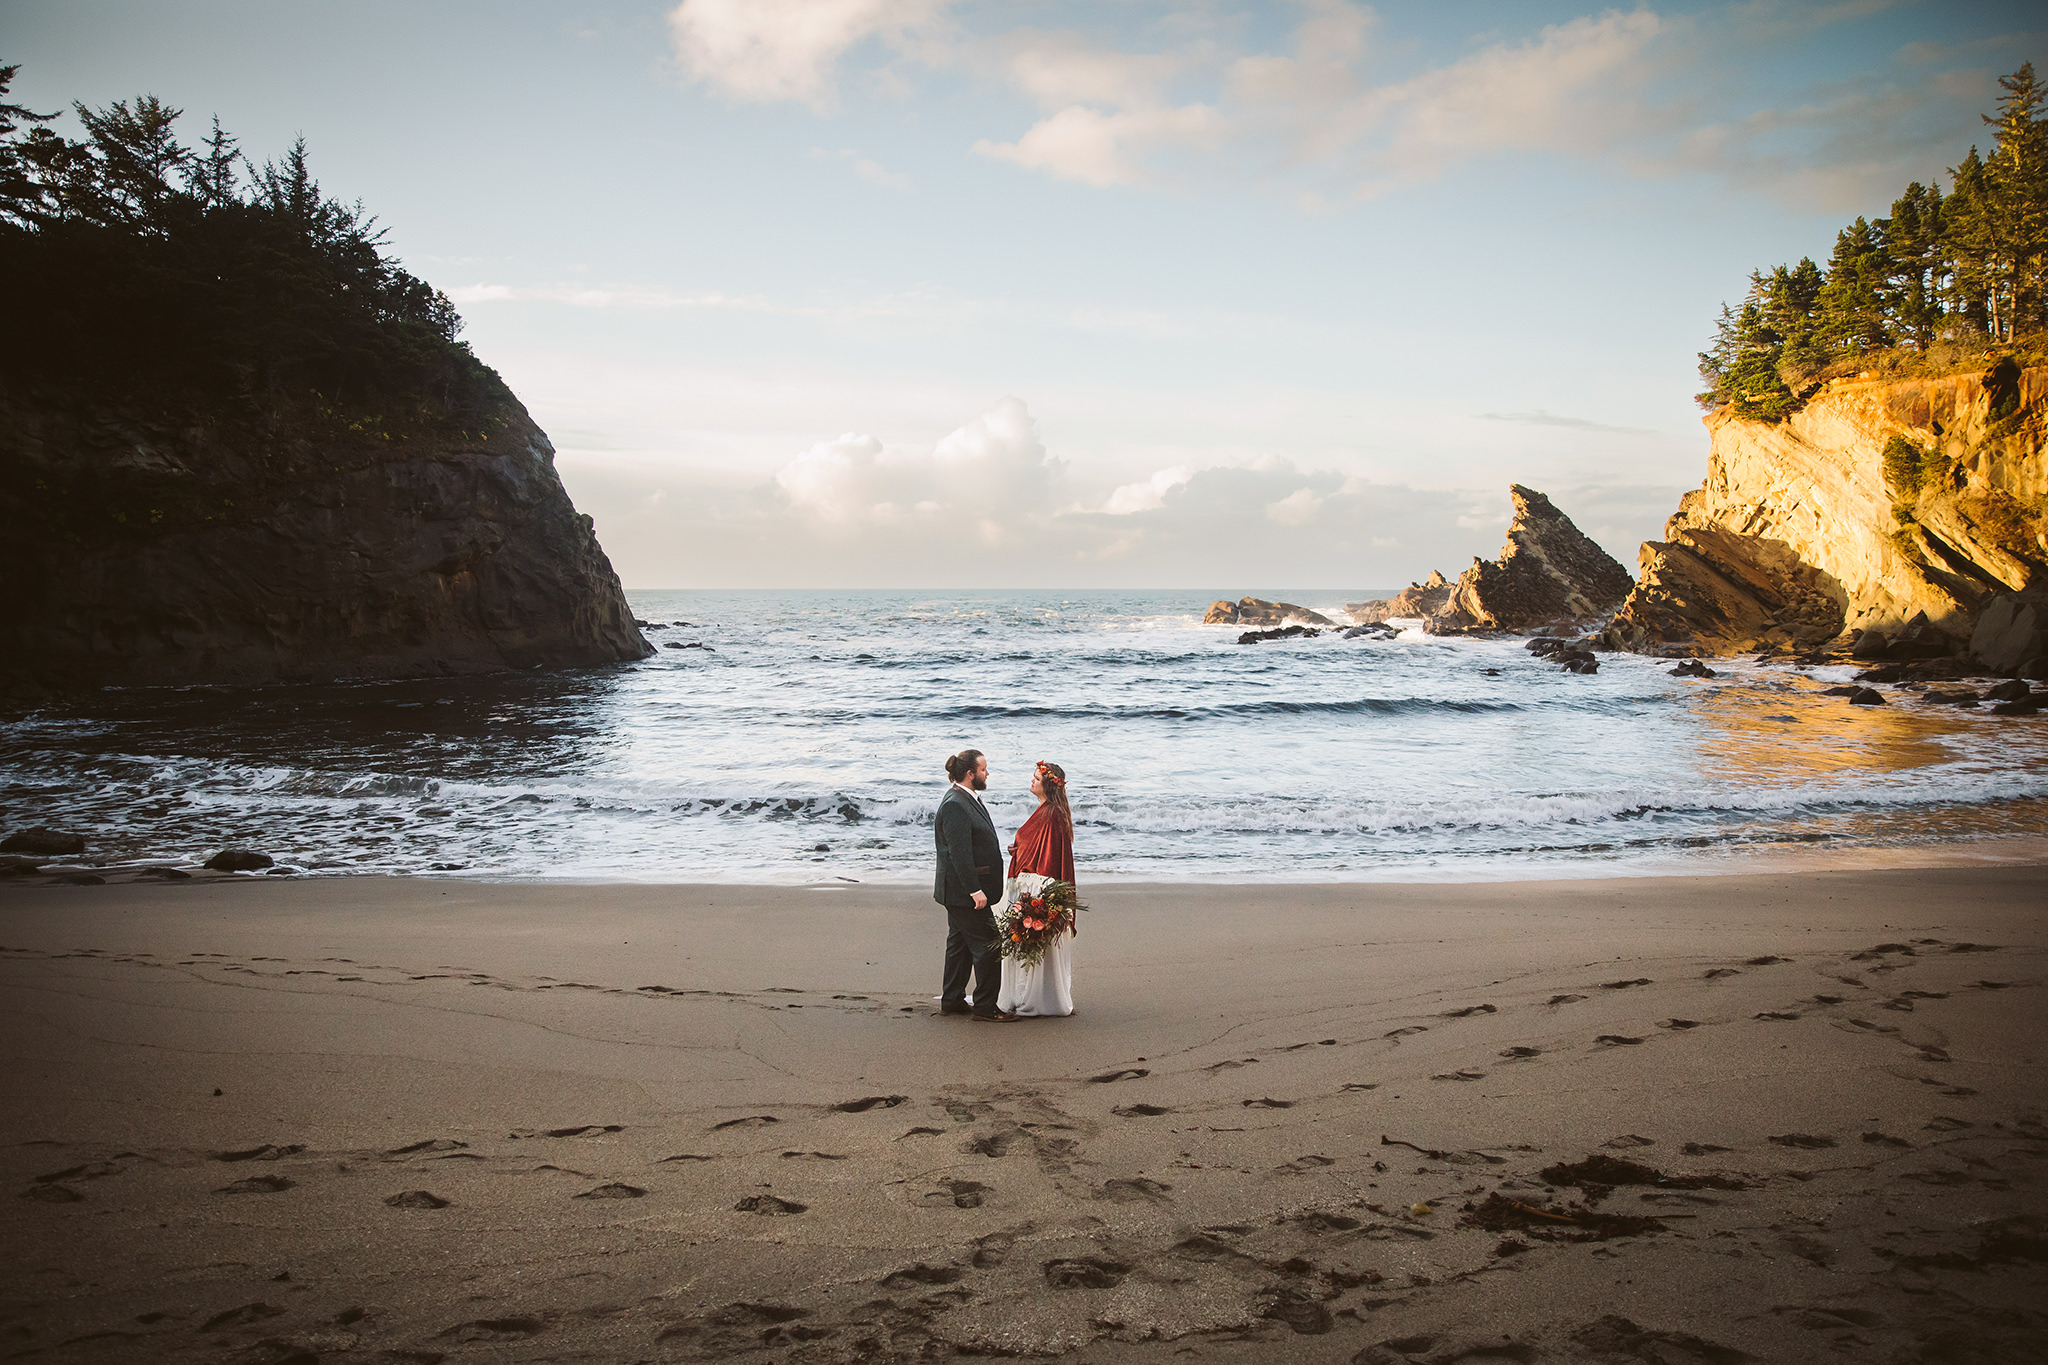 A wedding photo of a bride and groom in a beach alcove on the Southern Oregon coast